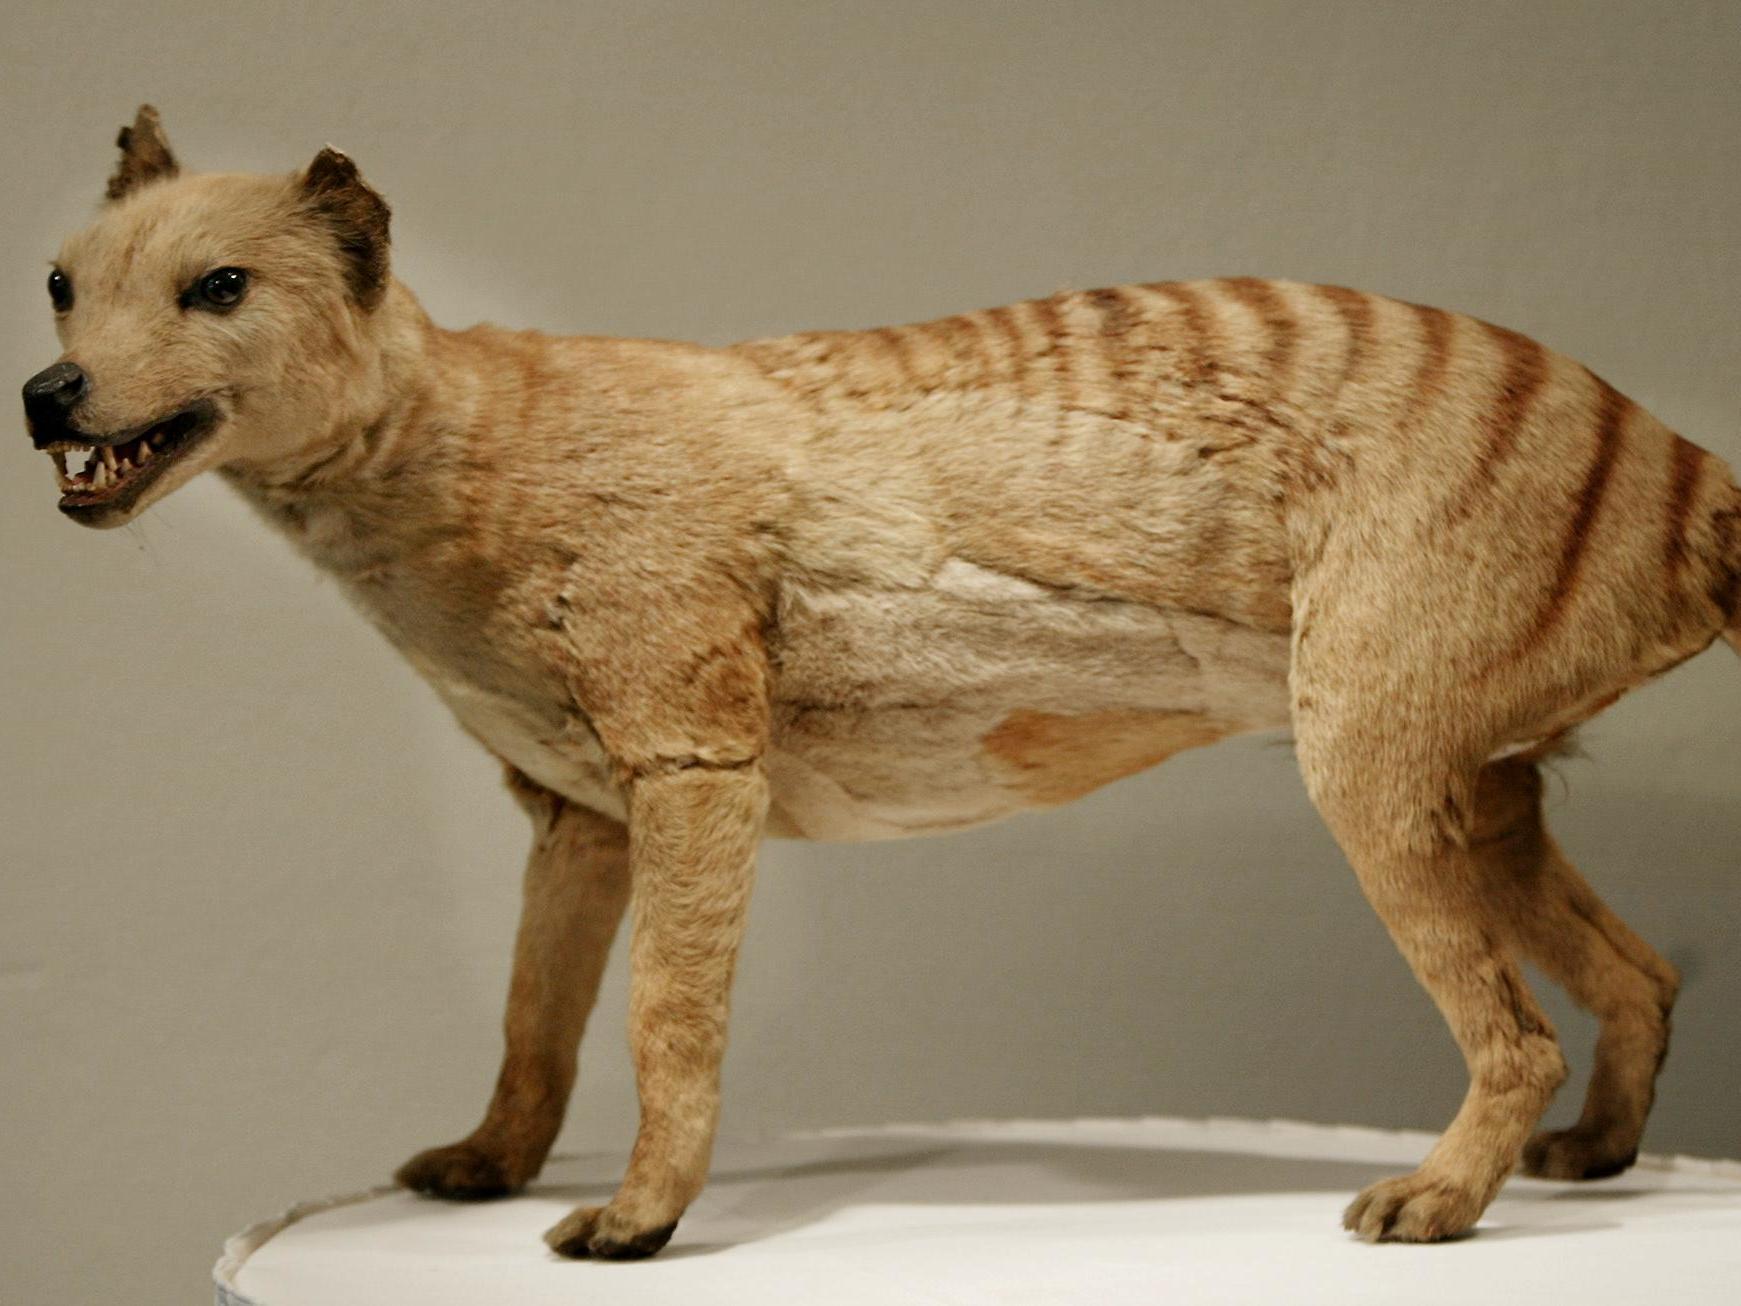 Tasmanian tiger declared extinct 80 years ago 'spotted